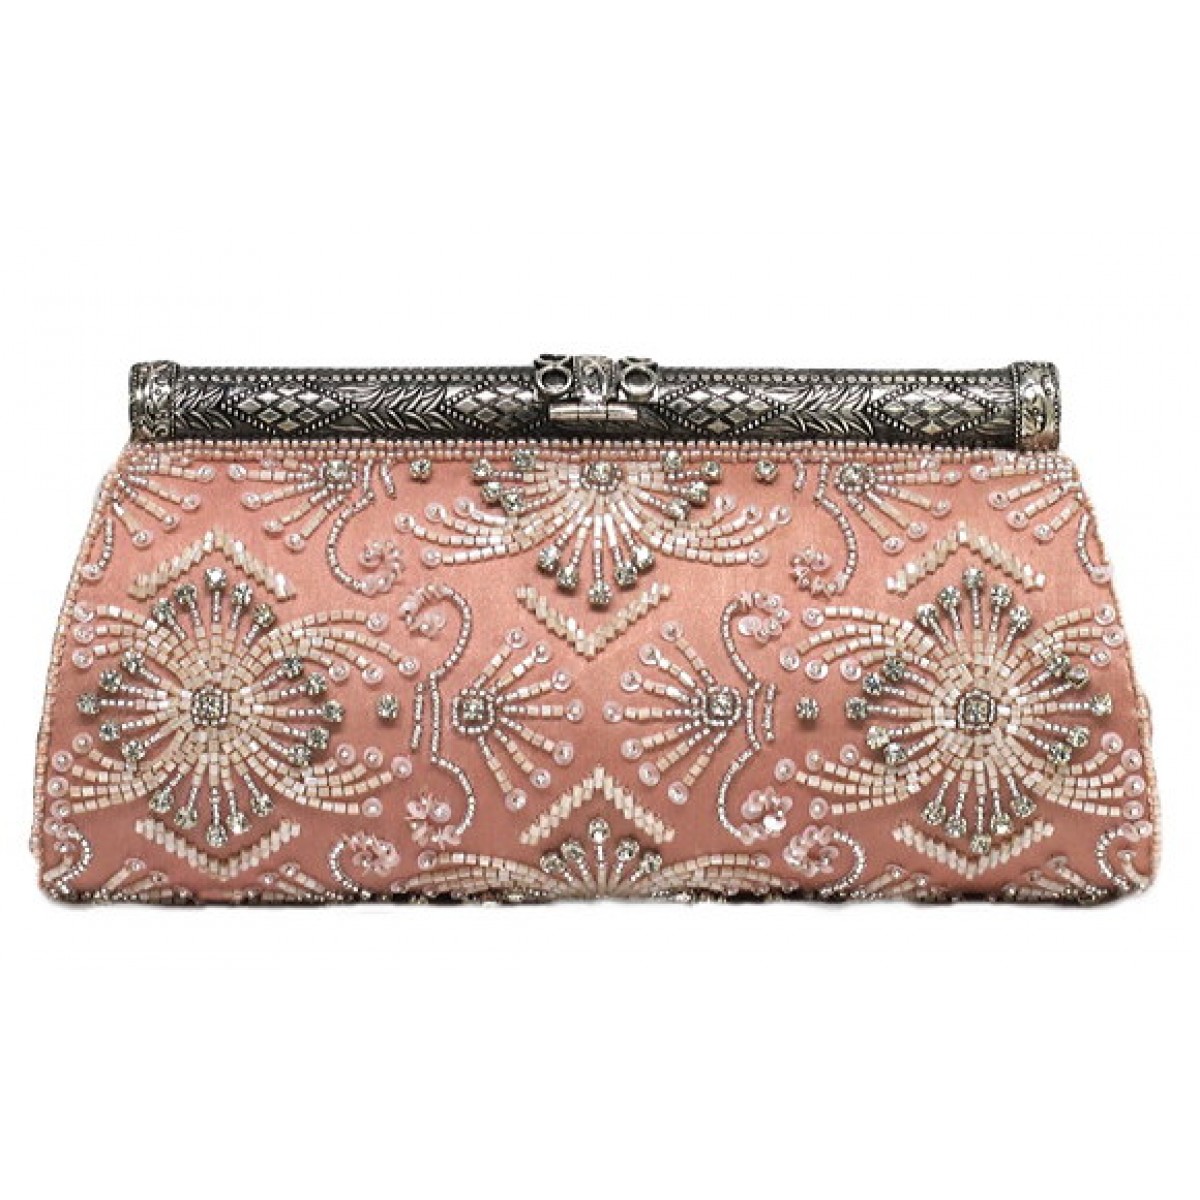 Clutch with Beaded and Crystal Embellishments